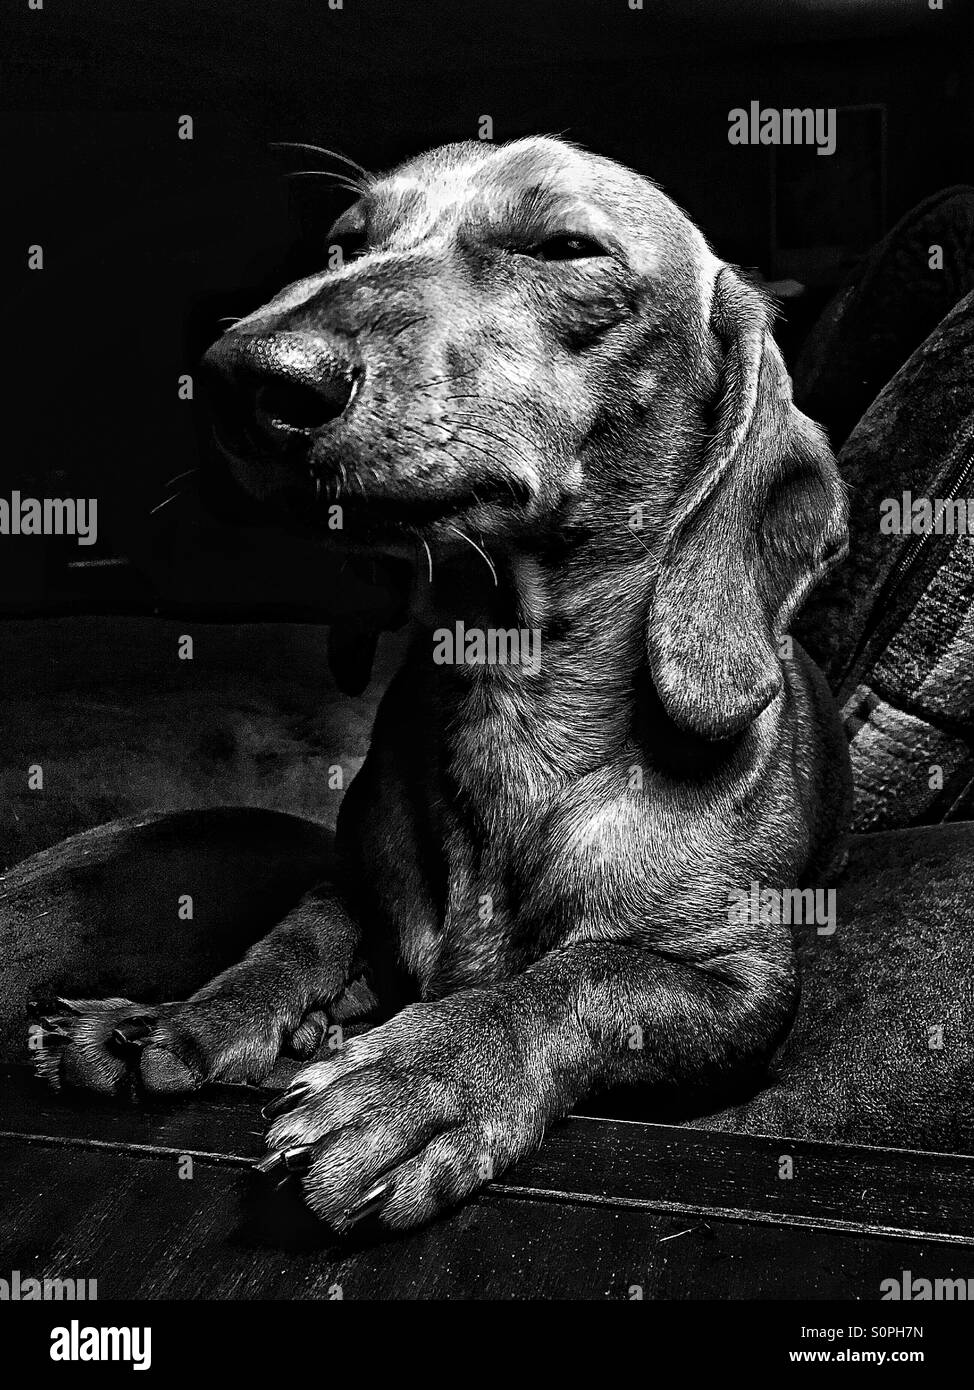 Miniature Dachshund relaxes and looks very regal Stock Photo